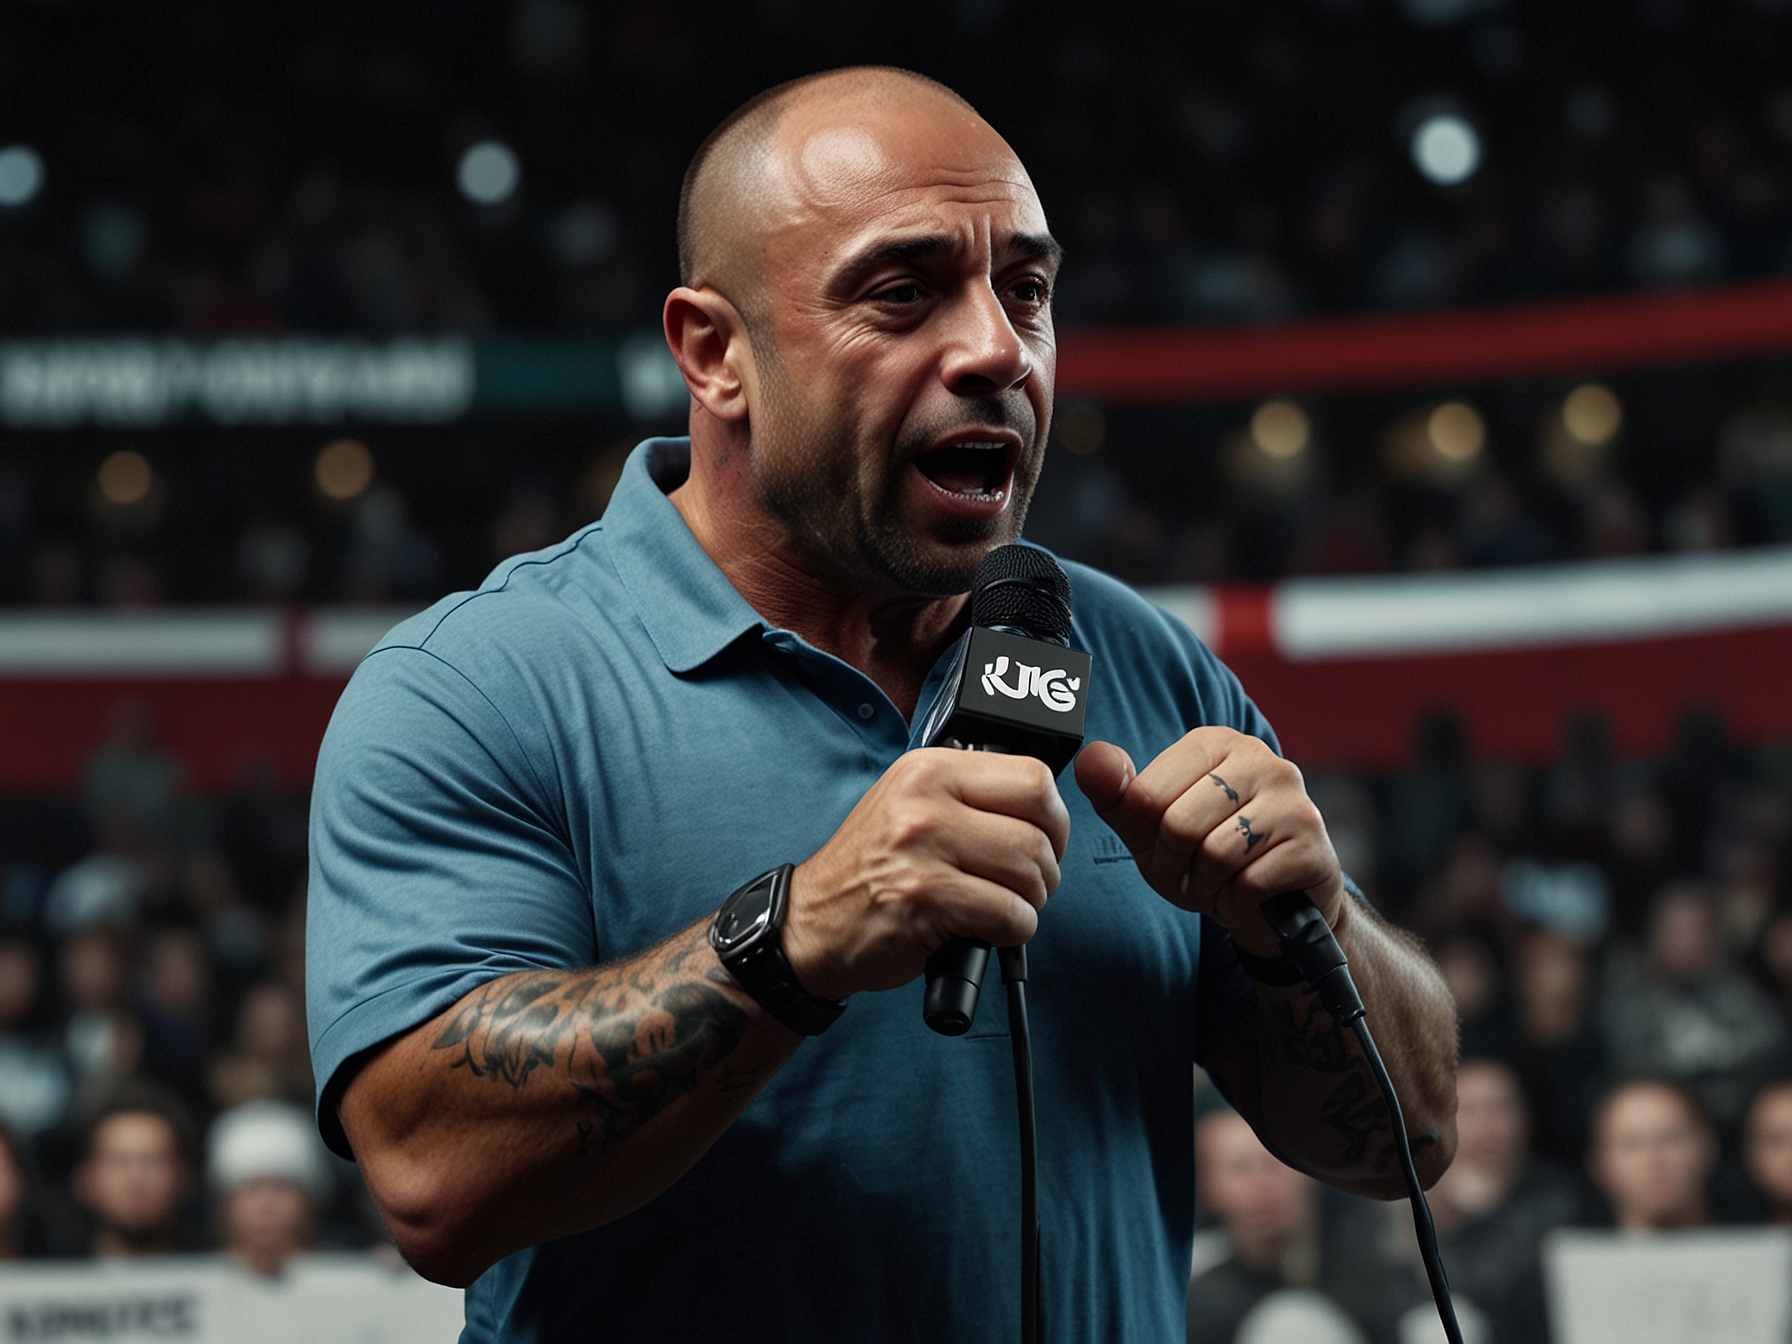 Joe Rogan speaking passionately on his podcast, 'The Joe Rogan Experience', emphasizing the financial struggles and unfair treatment of Olympic athletes in regards to compensation.